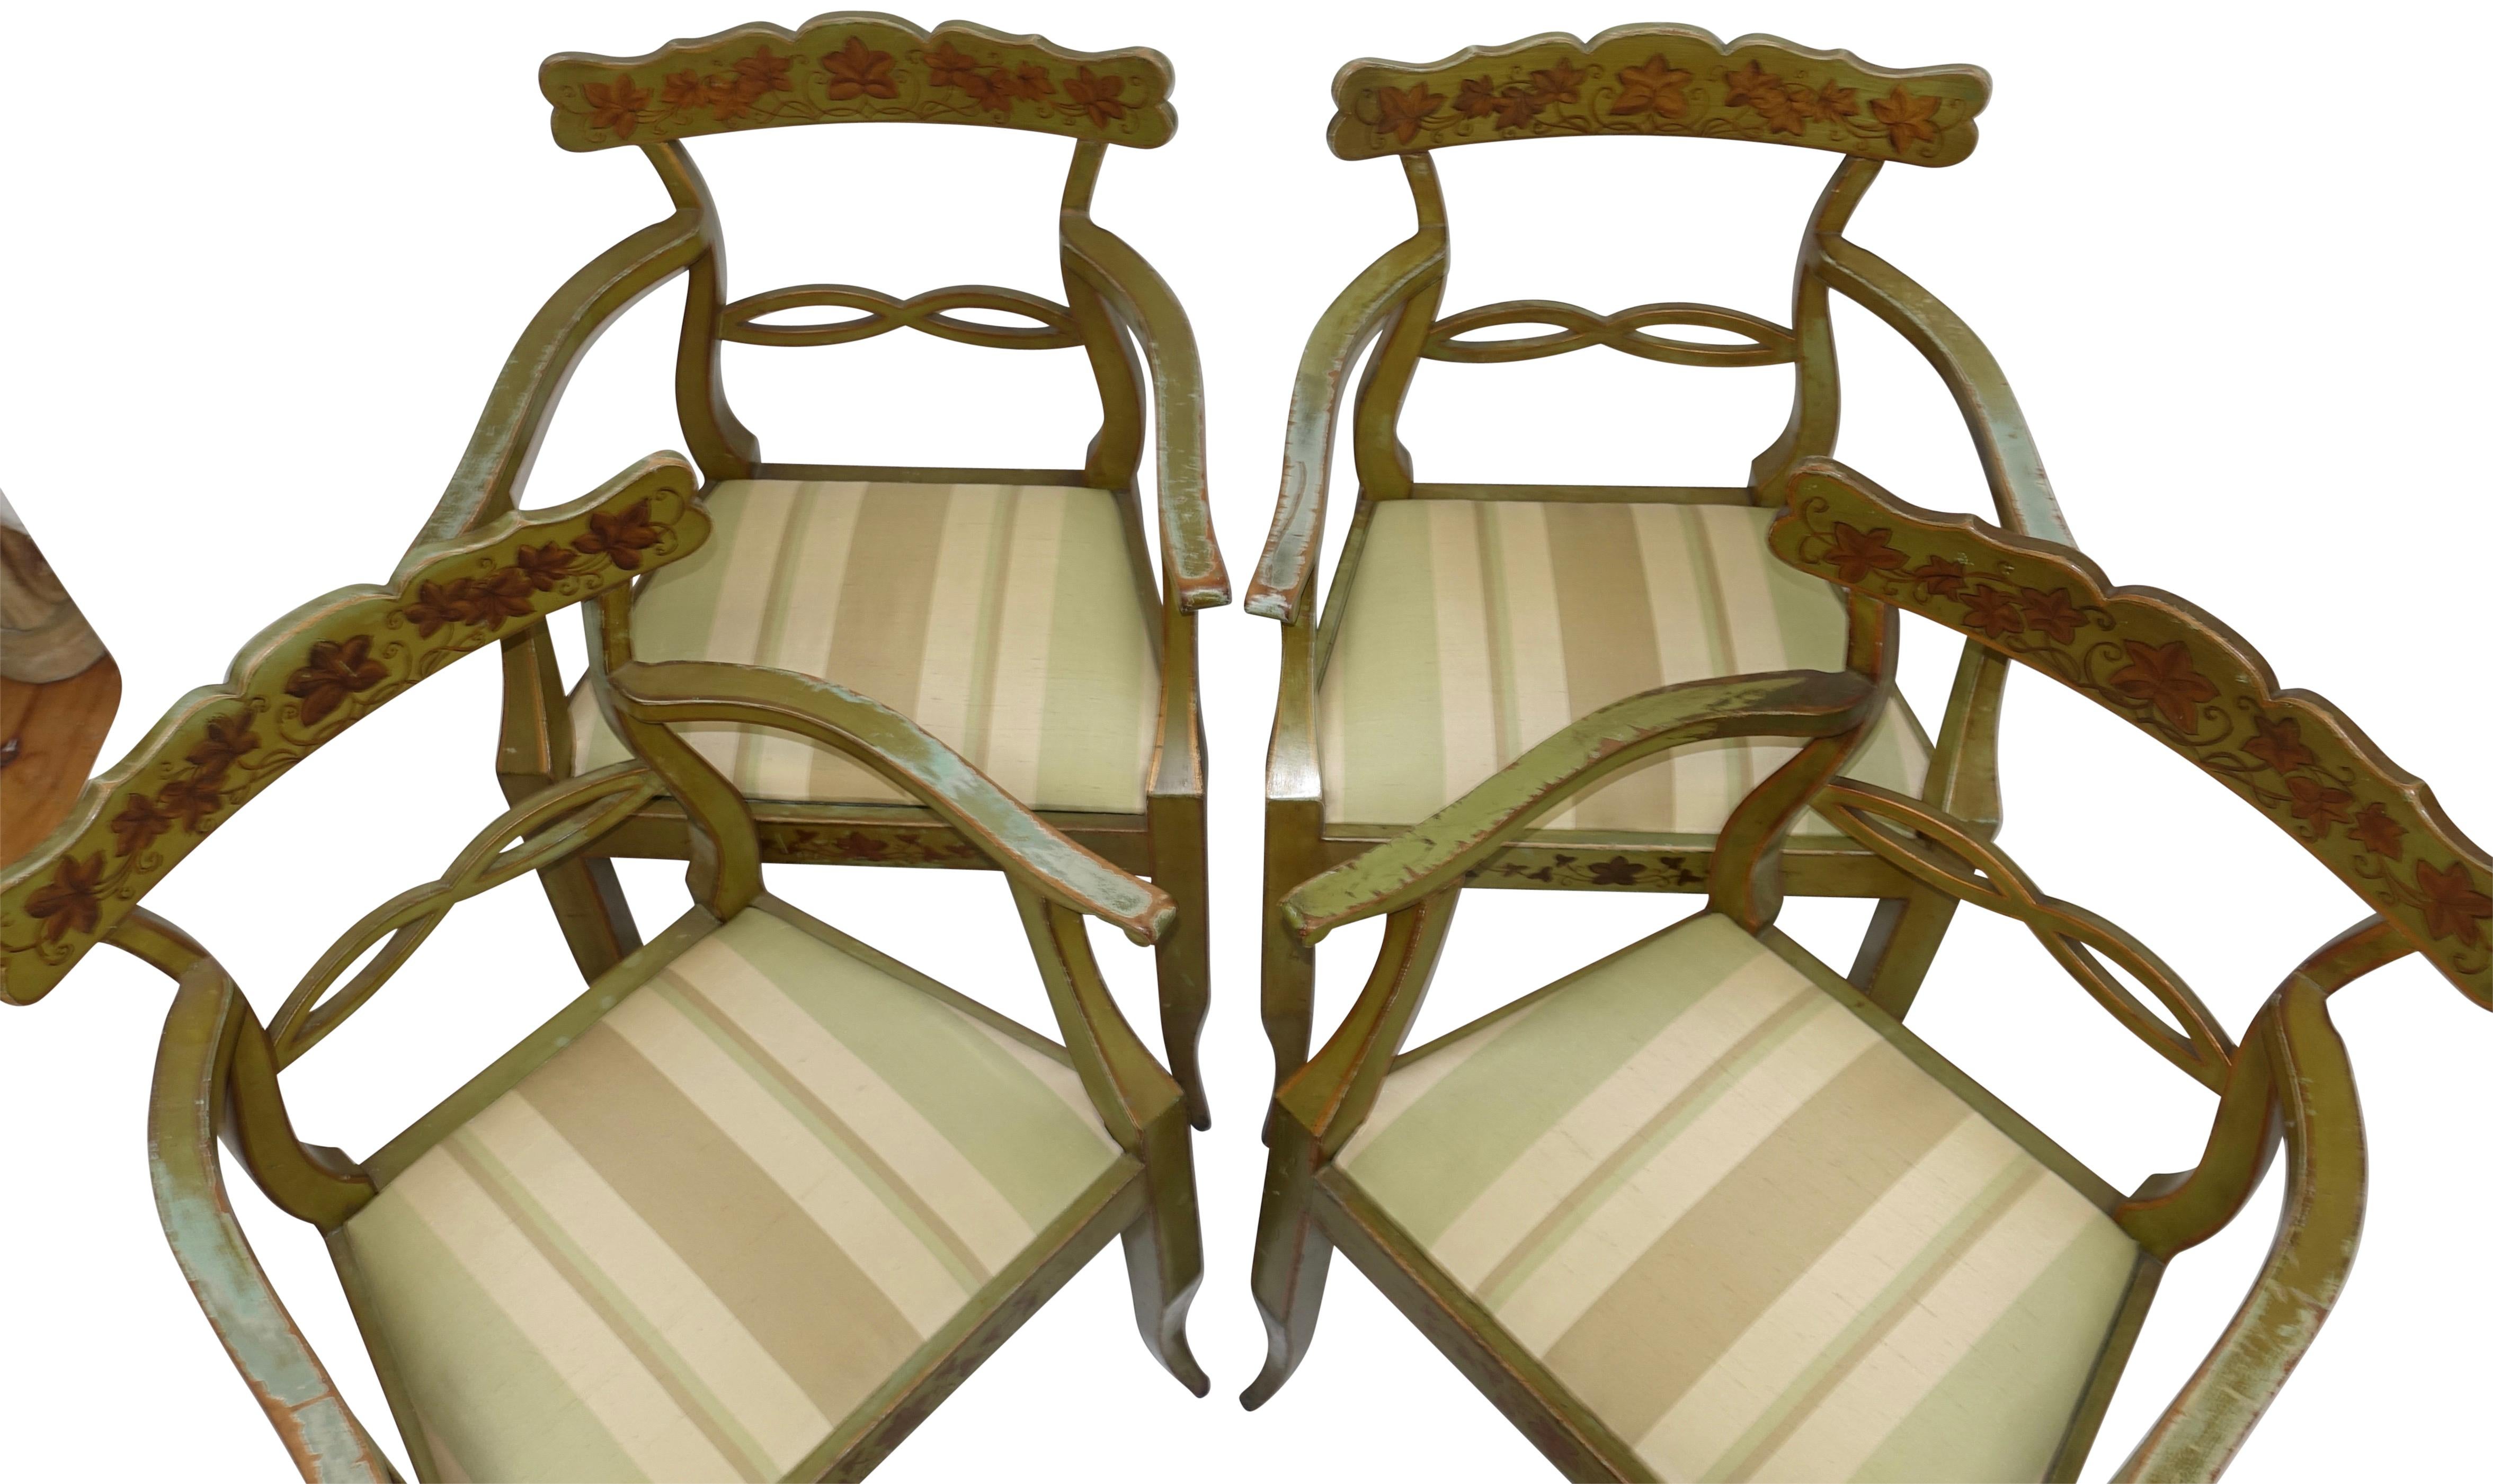 Four Green Painted Armchairs with Trailing Ivy, Northern European, 19th Century For Sale 8